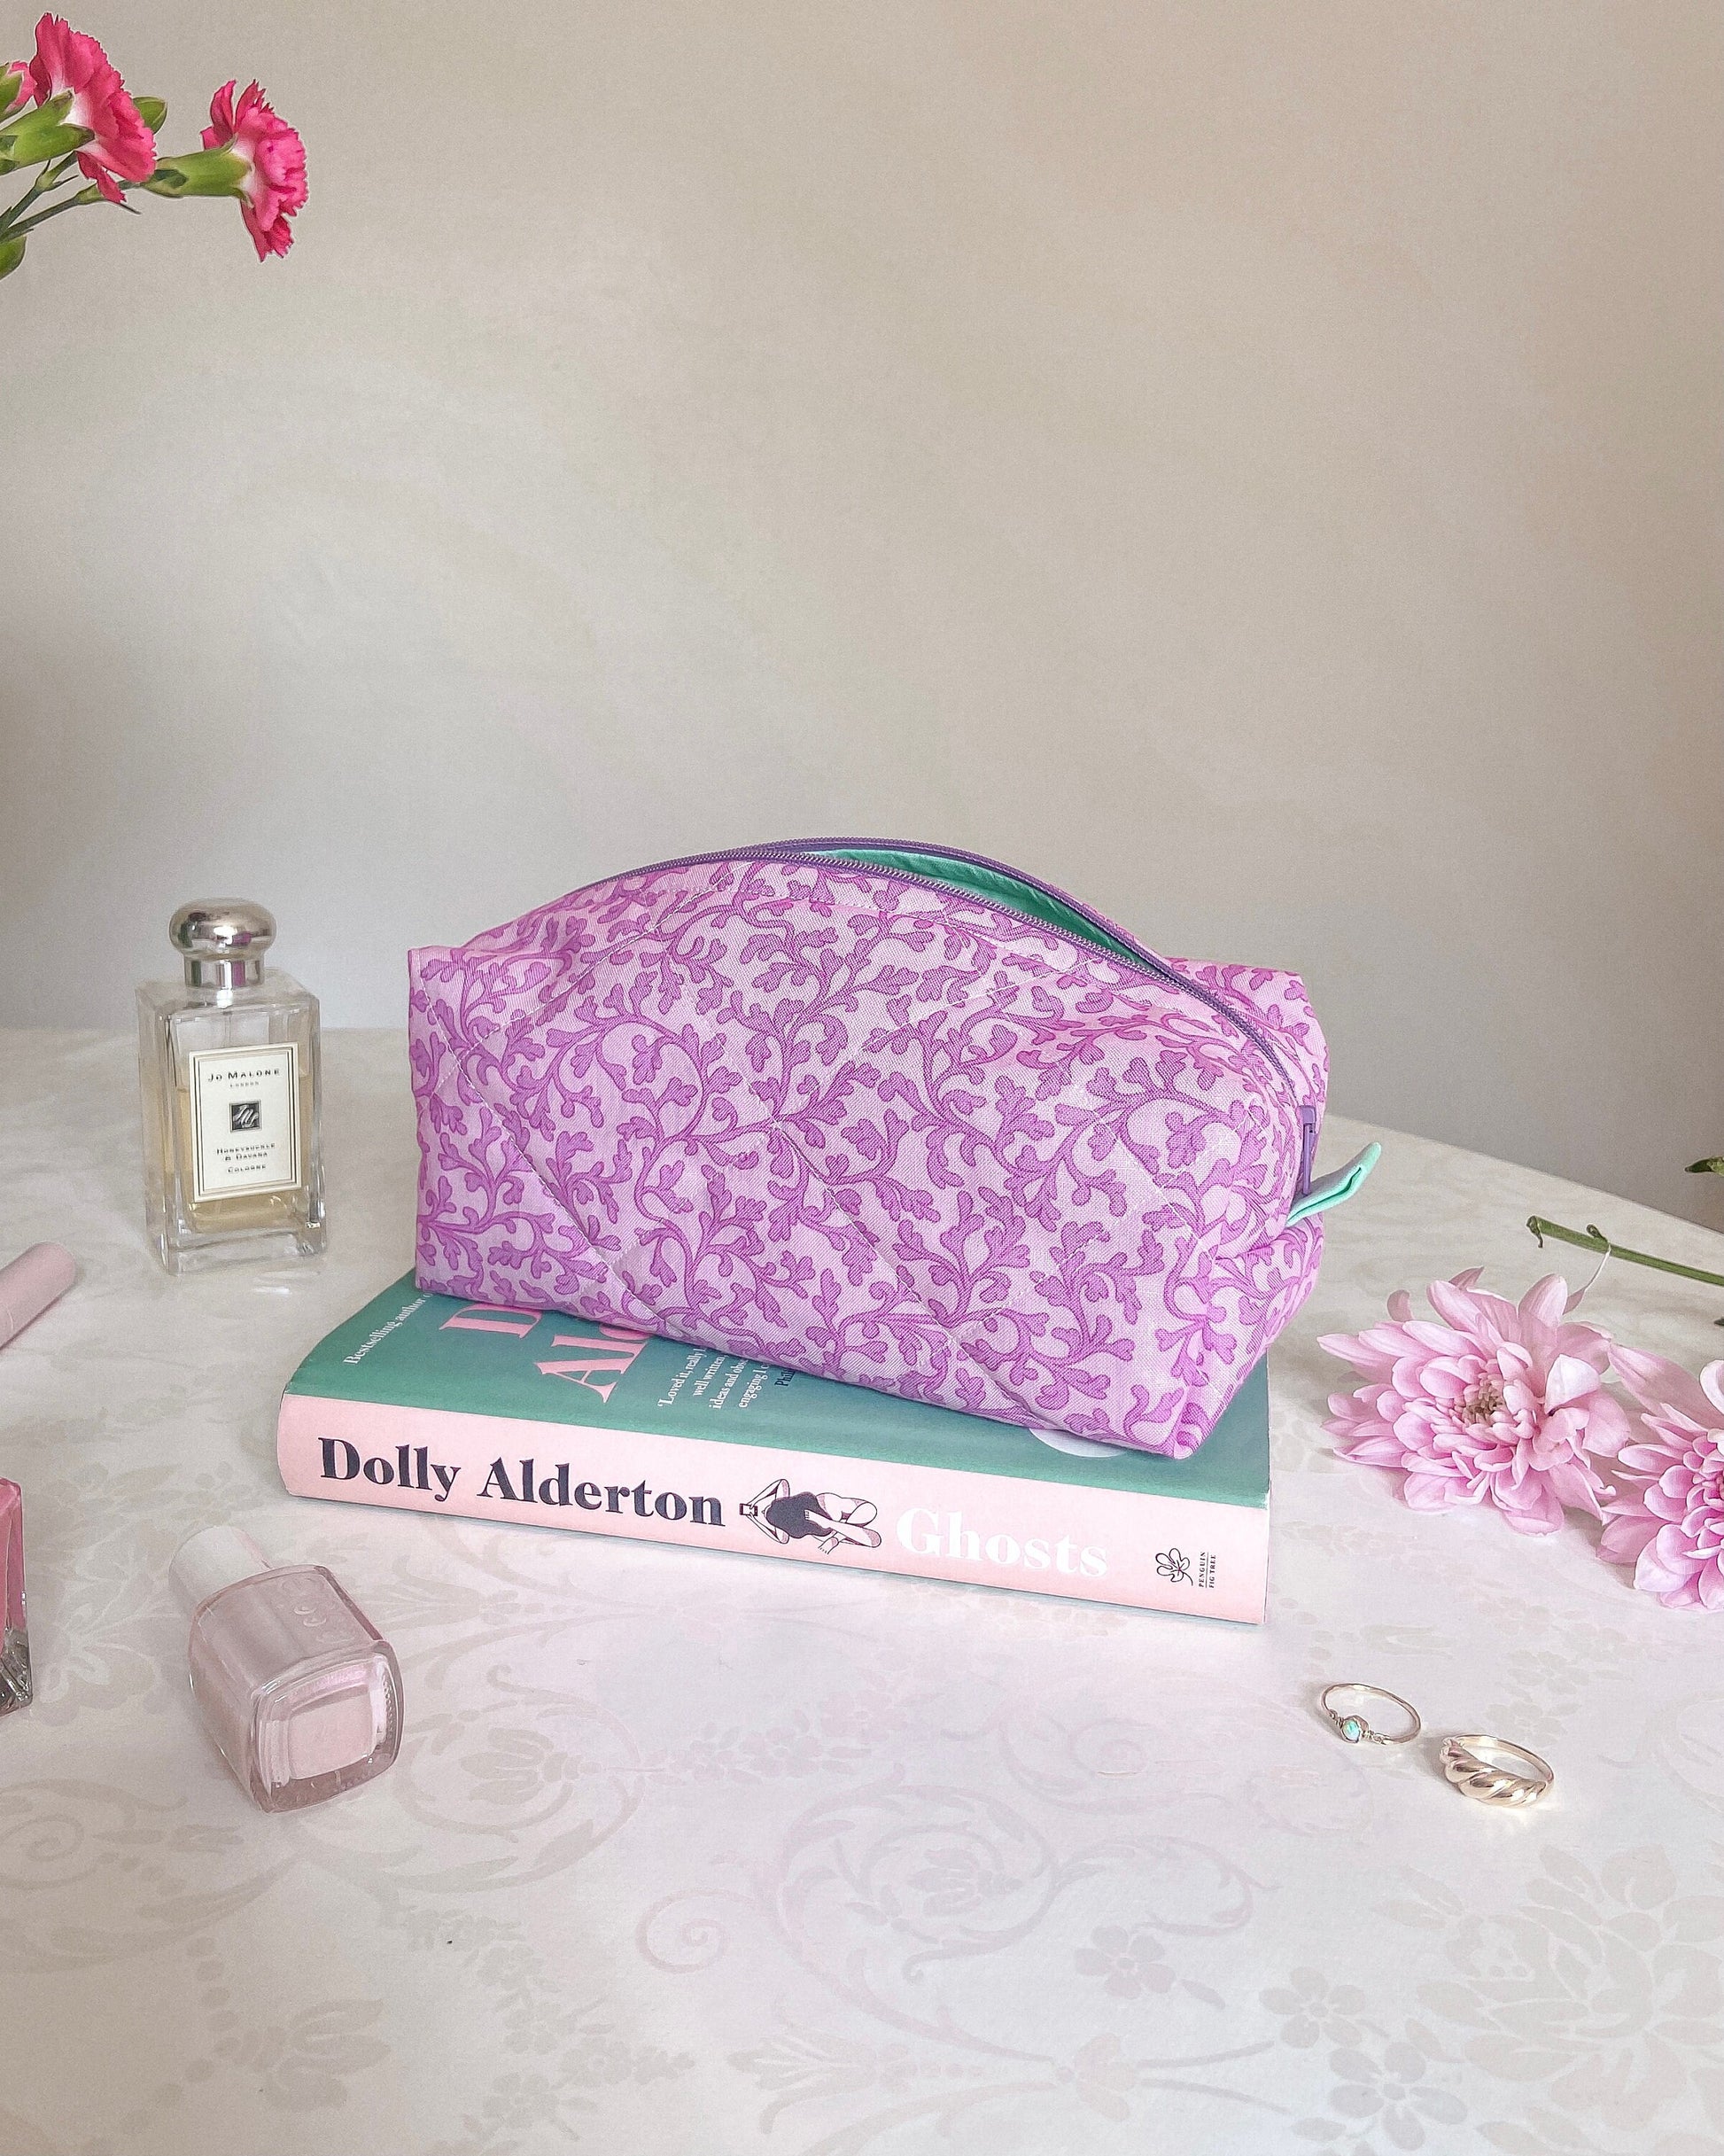 PINK MAKEUP BAG medium purple floral quilted cosmetic bag lined with mint green, cotton zip-up pouch, make-up brush bag handmade in U.K.